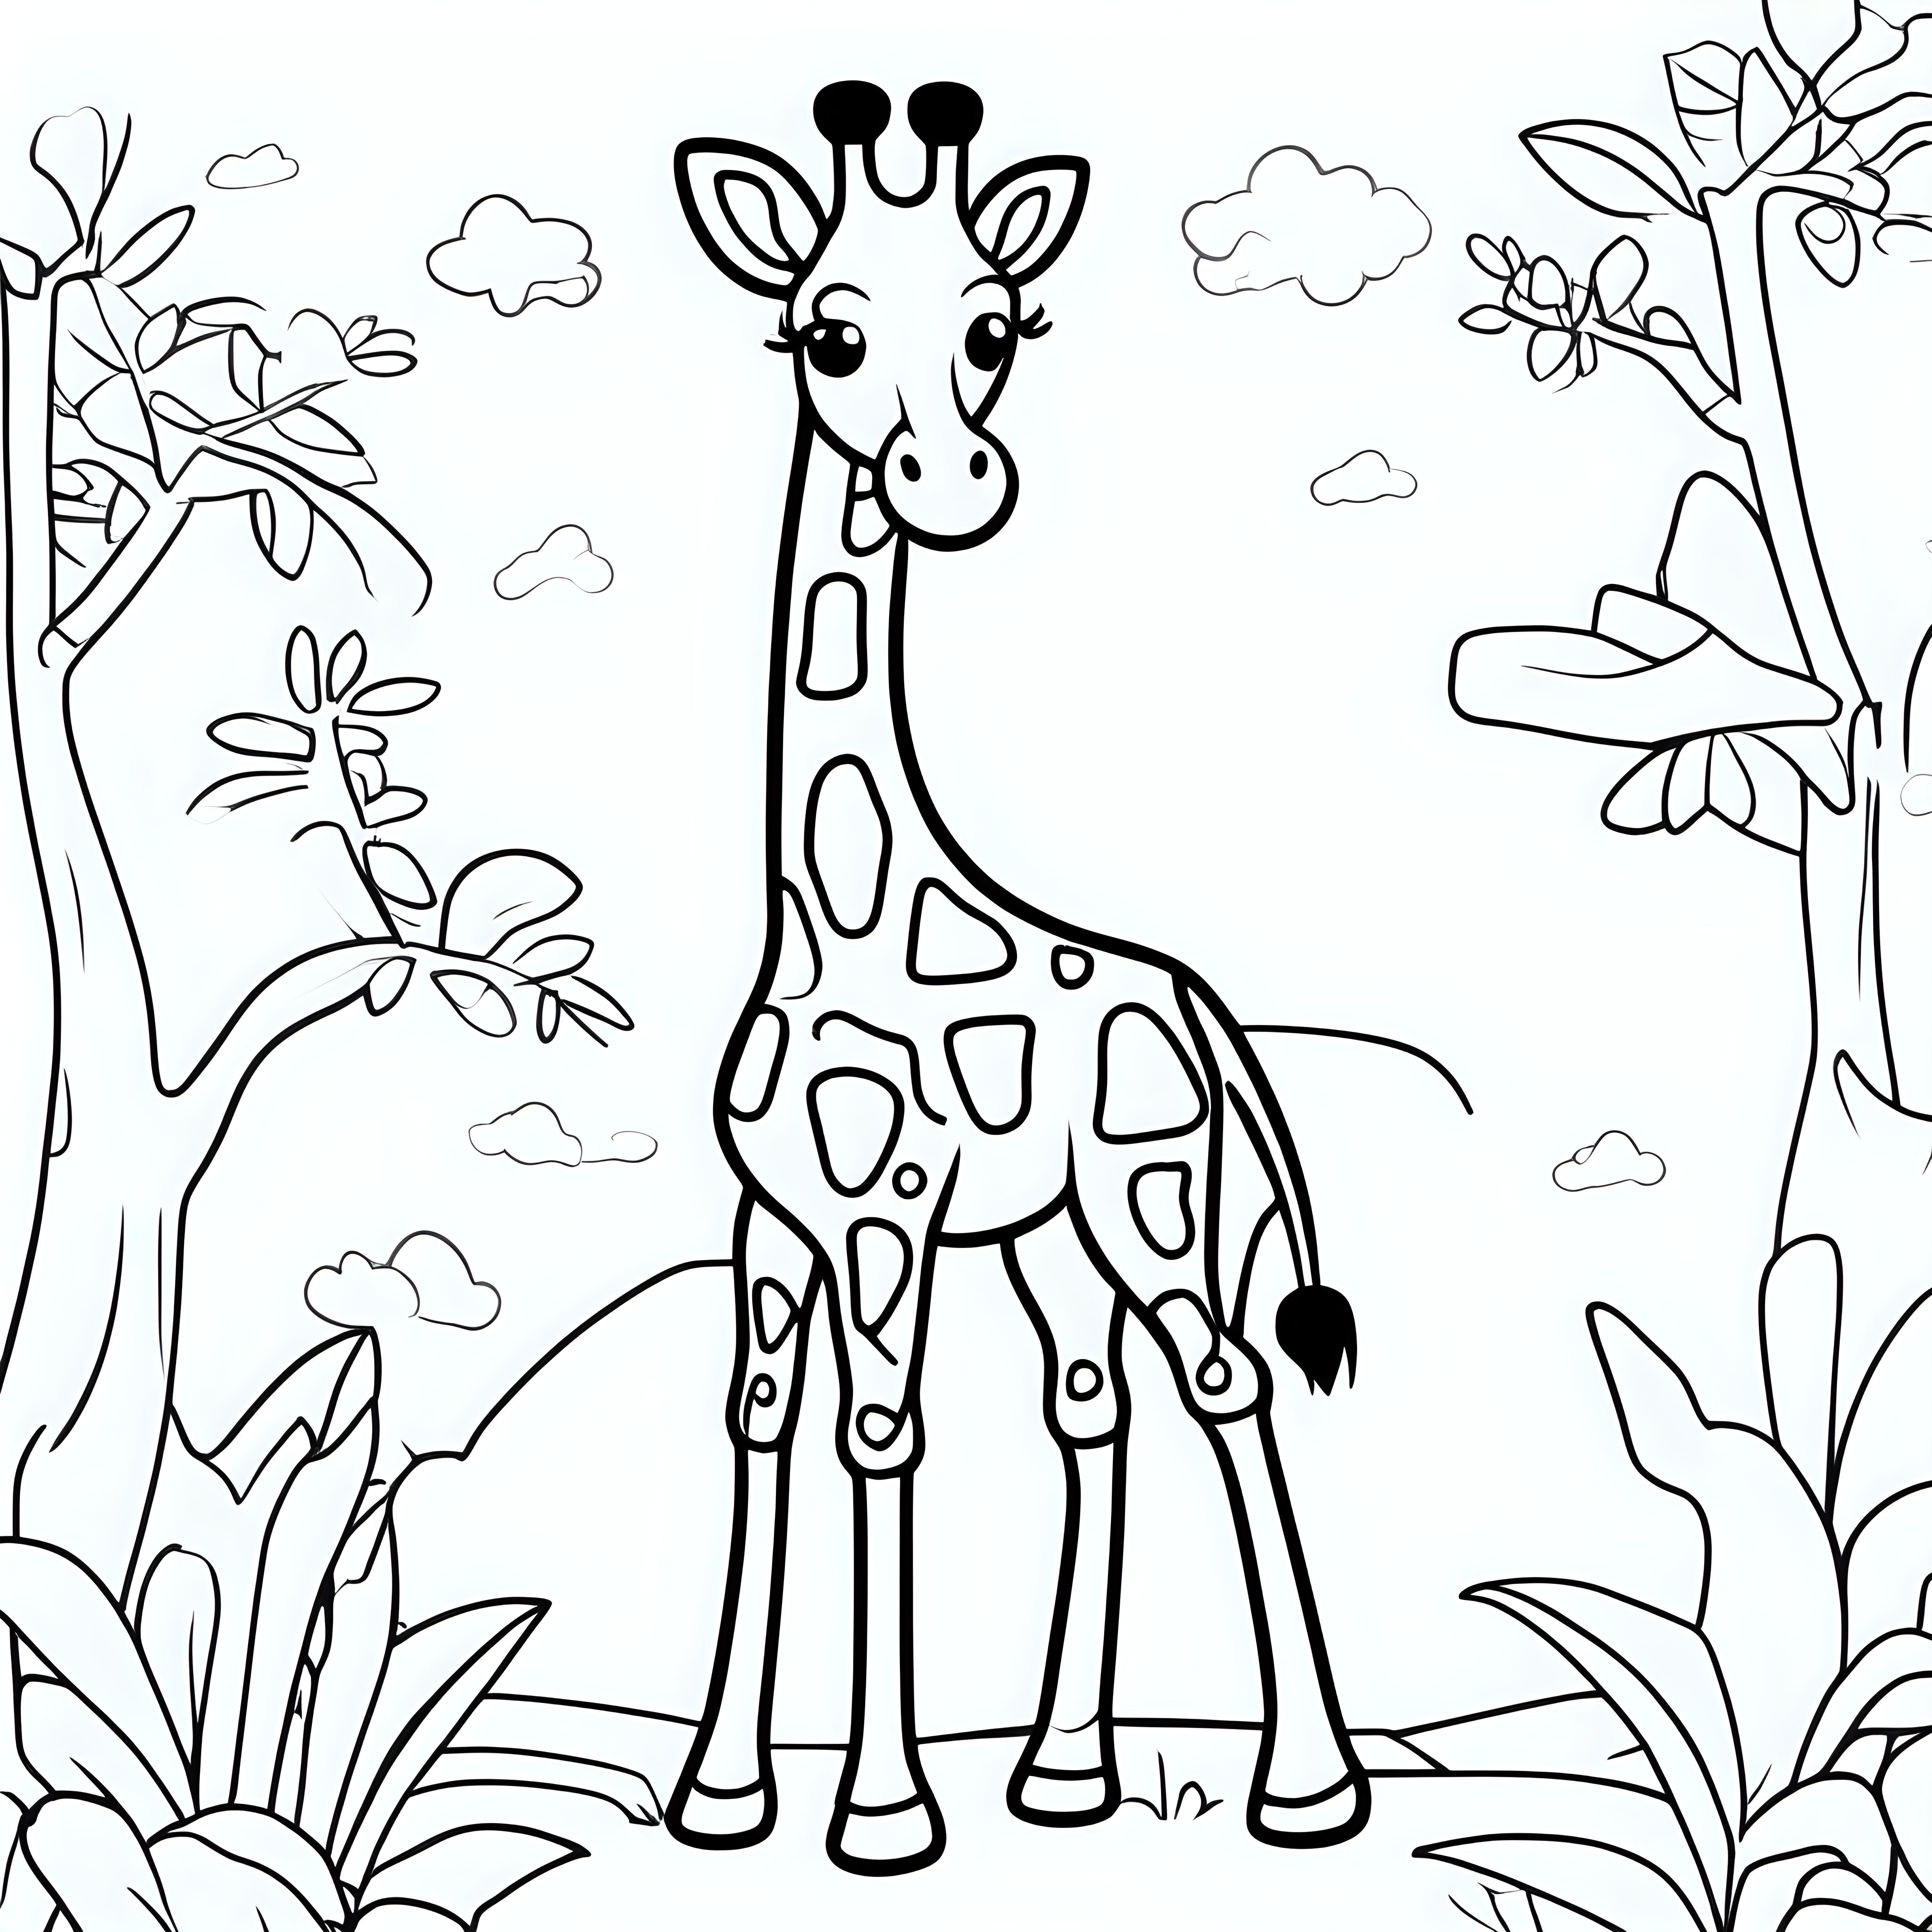 draw a cute Gyraph with only the outline in black for a coloring book for kids